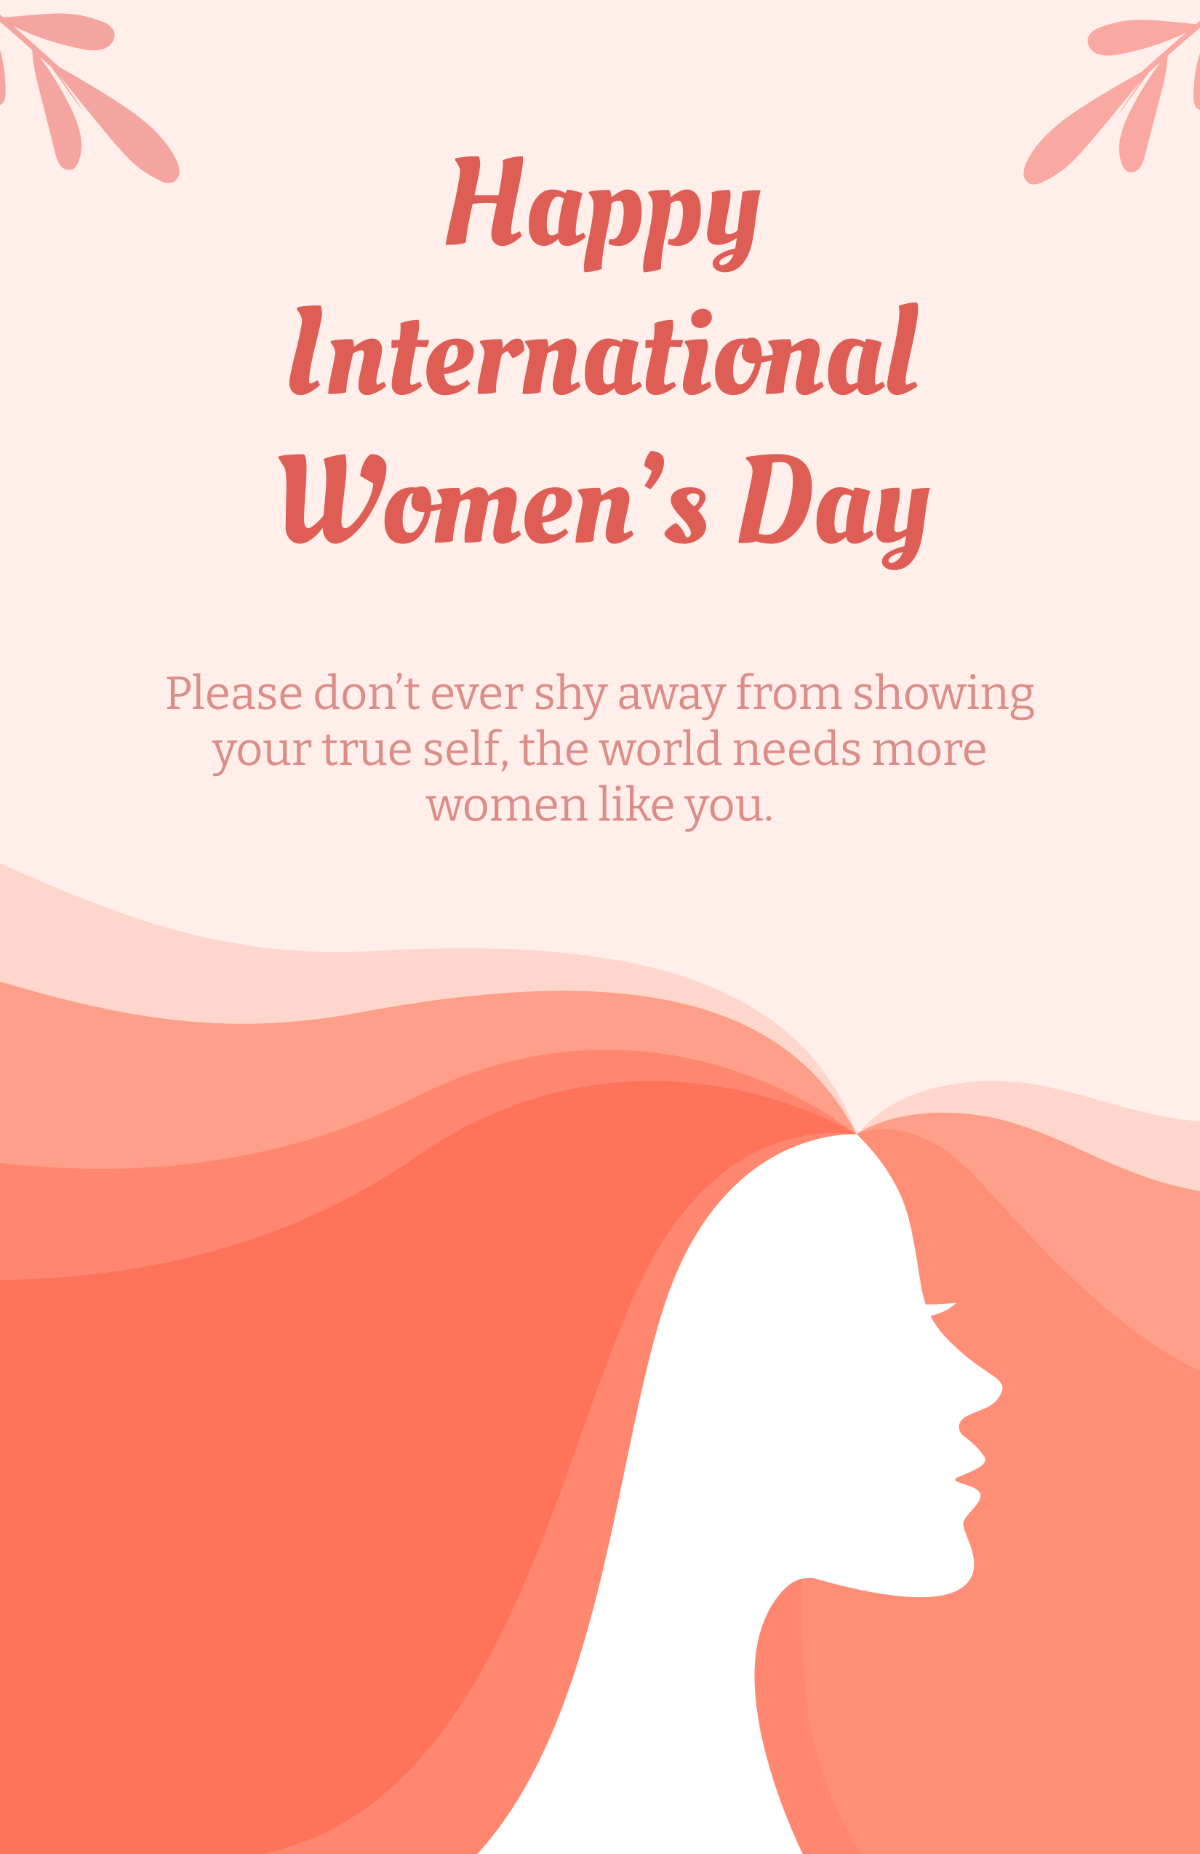 Happy International Women's Day Poster Template